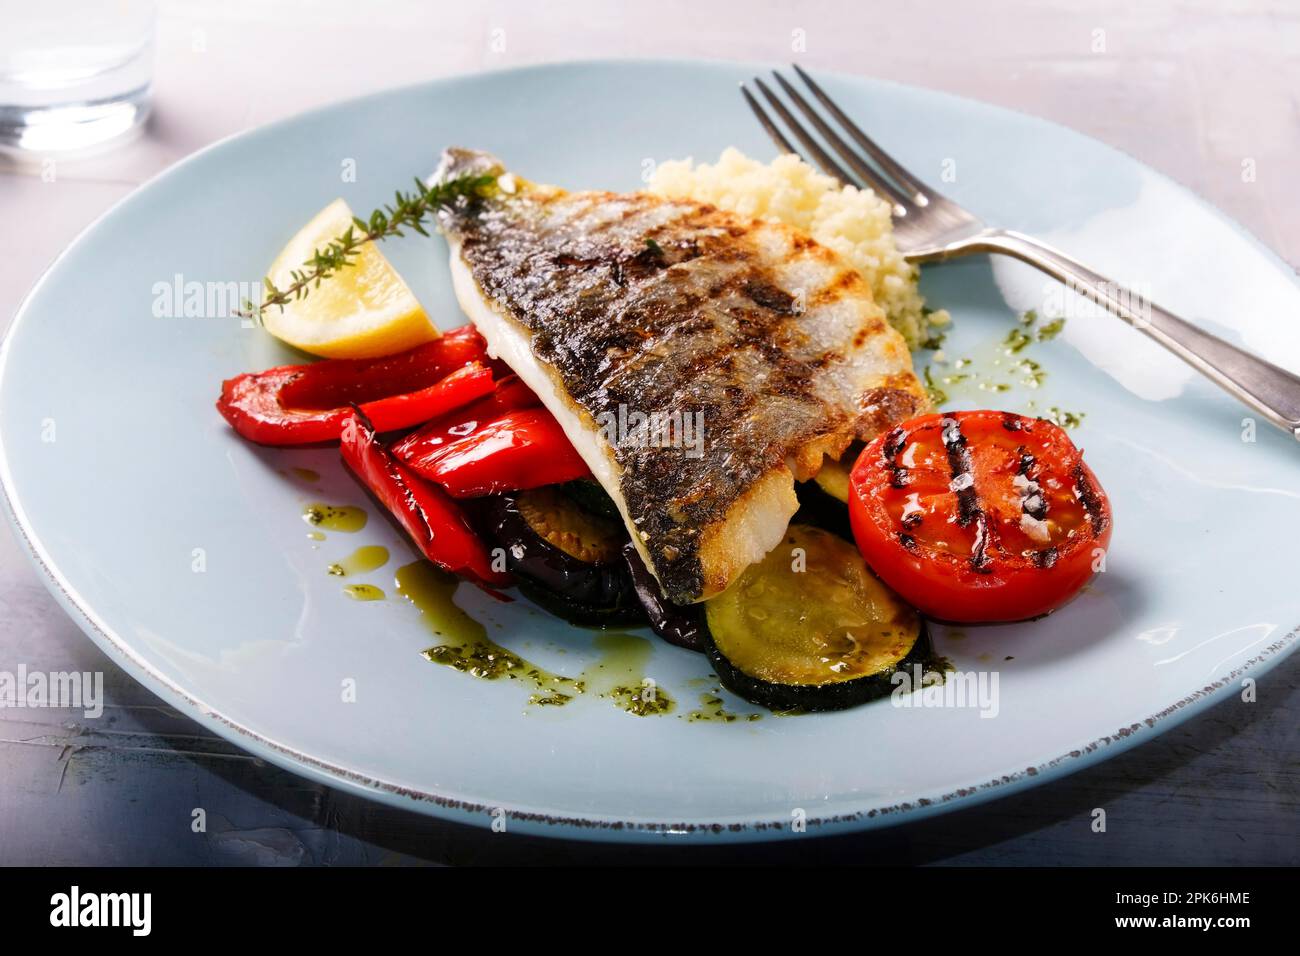 Sea bass with Mediterranean vegetables Stock Photo